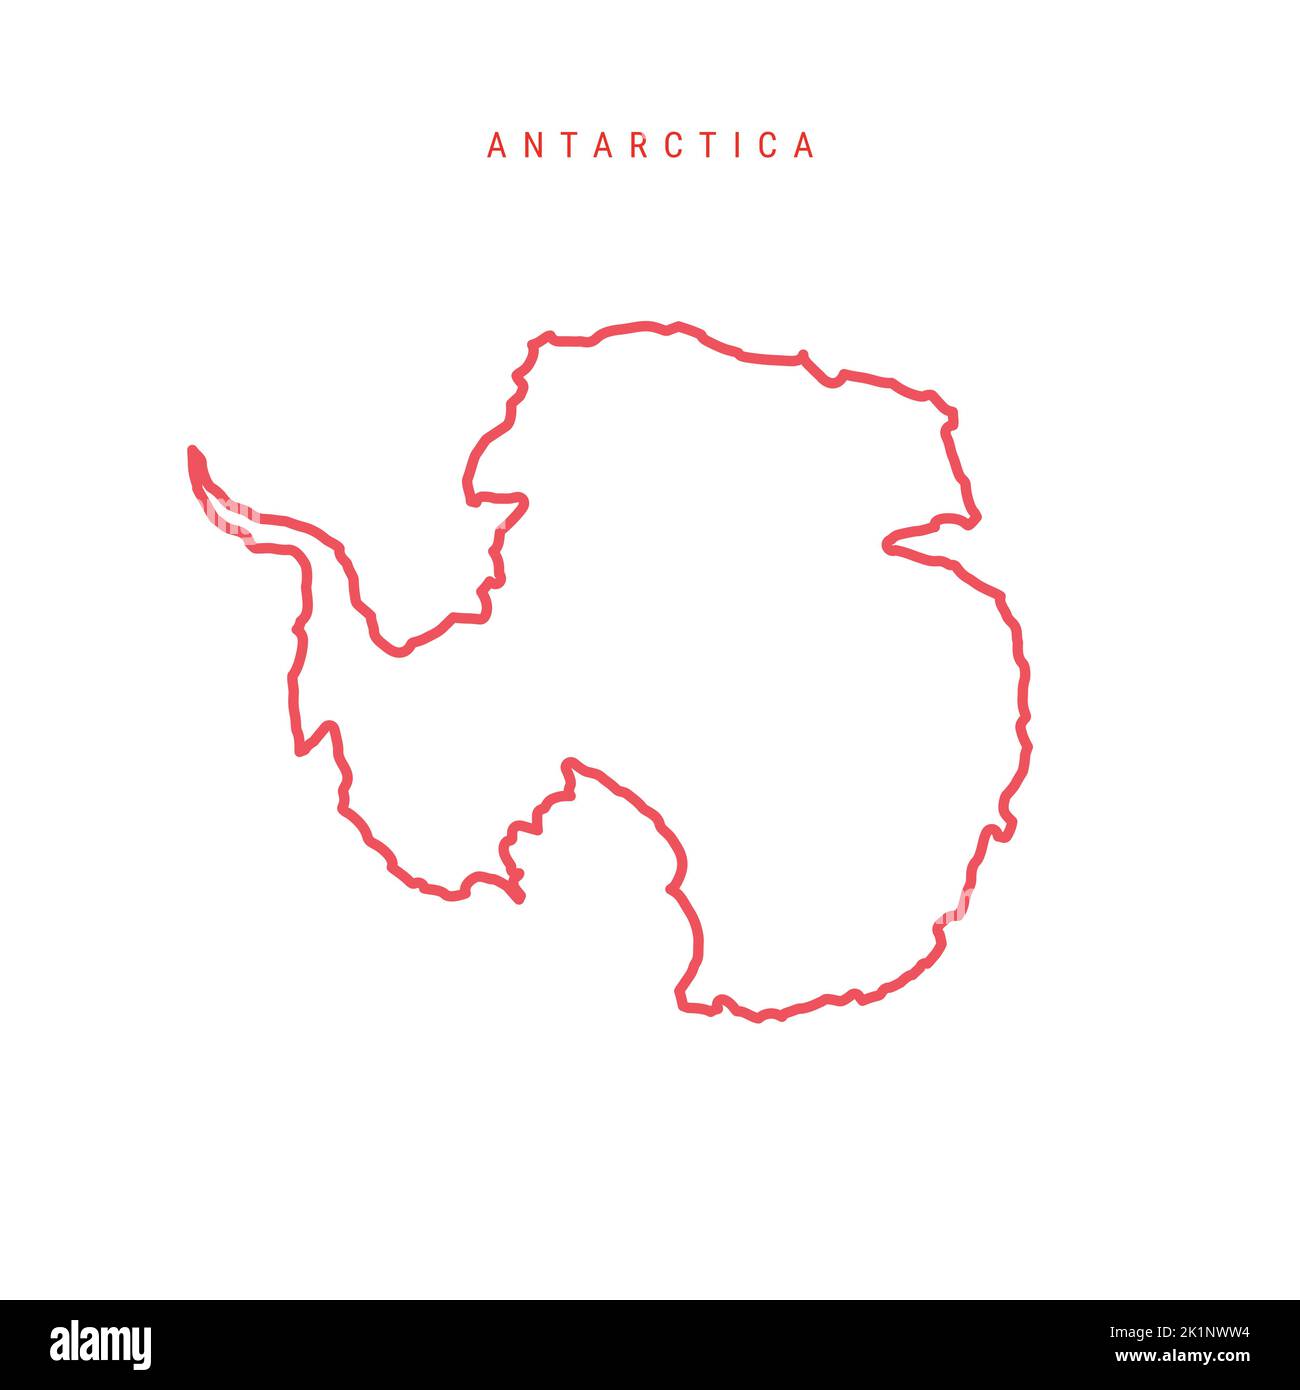 Antarctic editable outline map. Southern continent red border. Country name. Adjust line weight. Change to any color. Vector illustration. Stock Vector